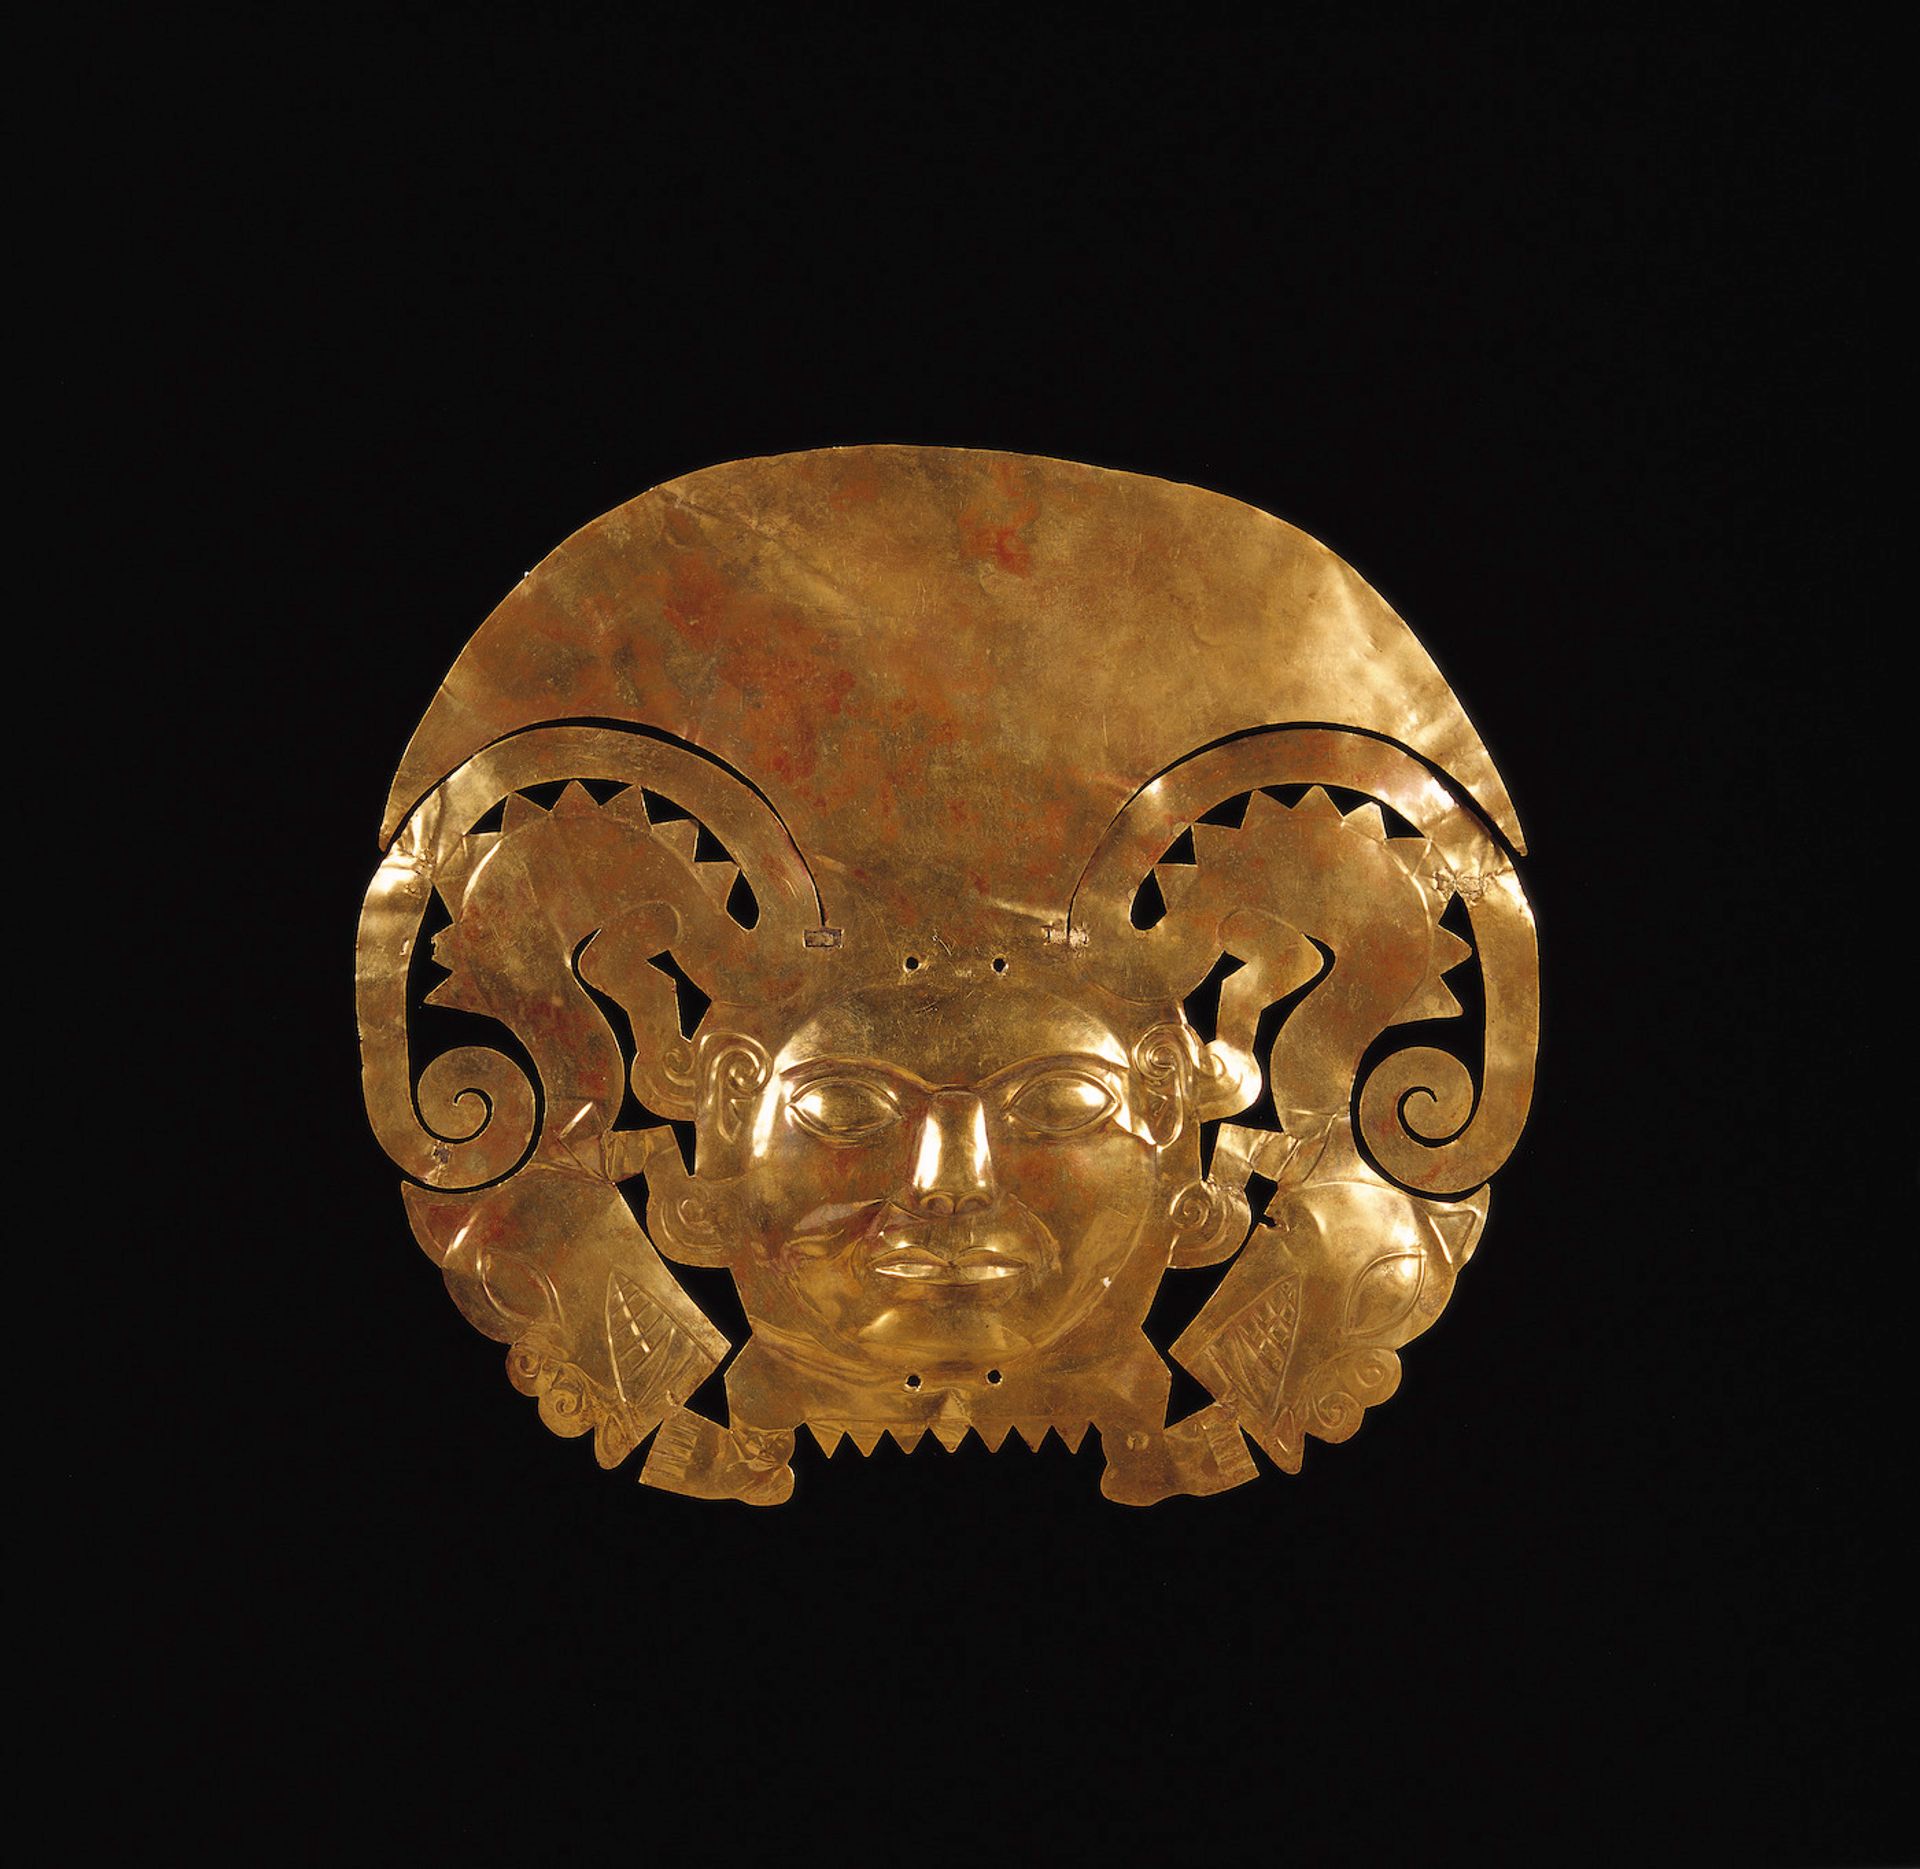 A 14-karat gold frontal adornment depicting a human head with half-moon headdress and zoomorphic figures with feline heads and appendages on the snout Museo Larco